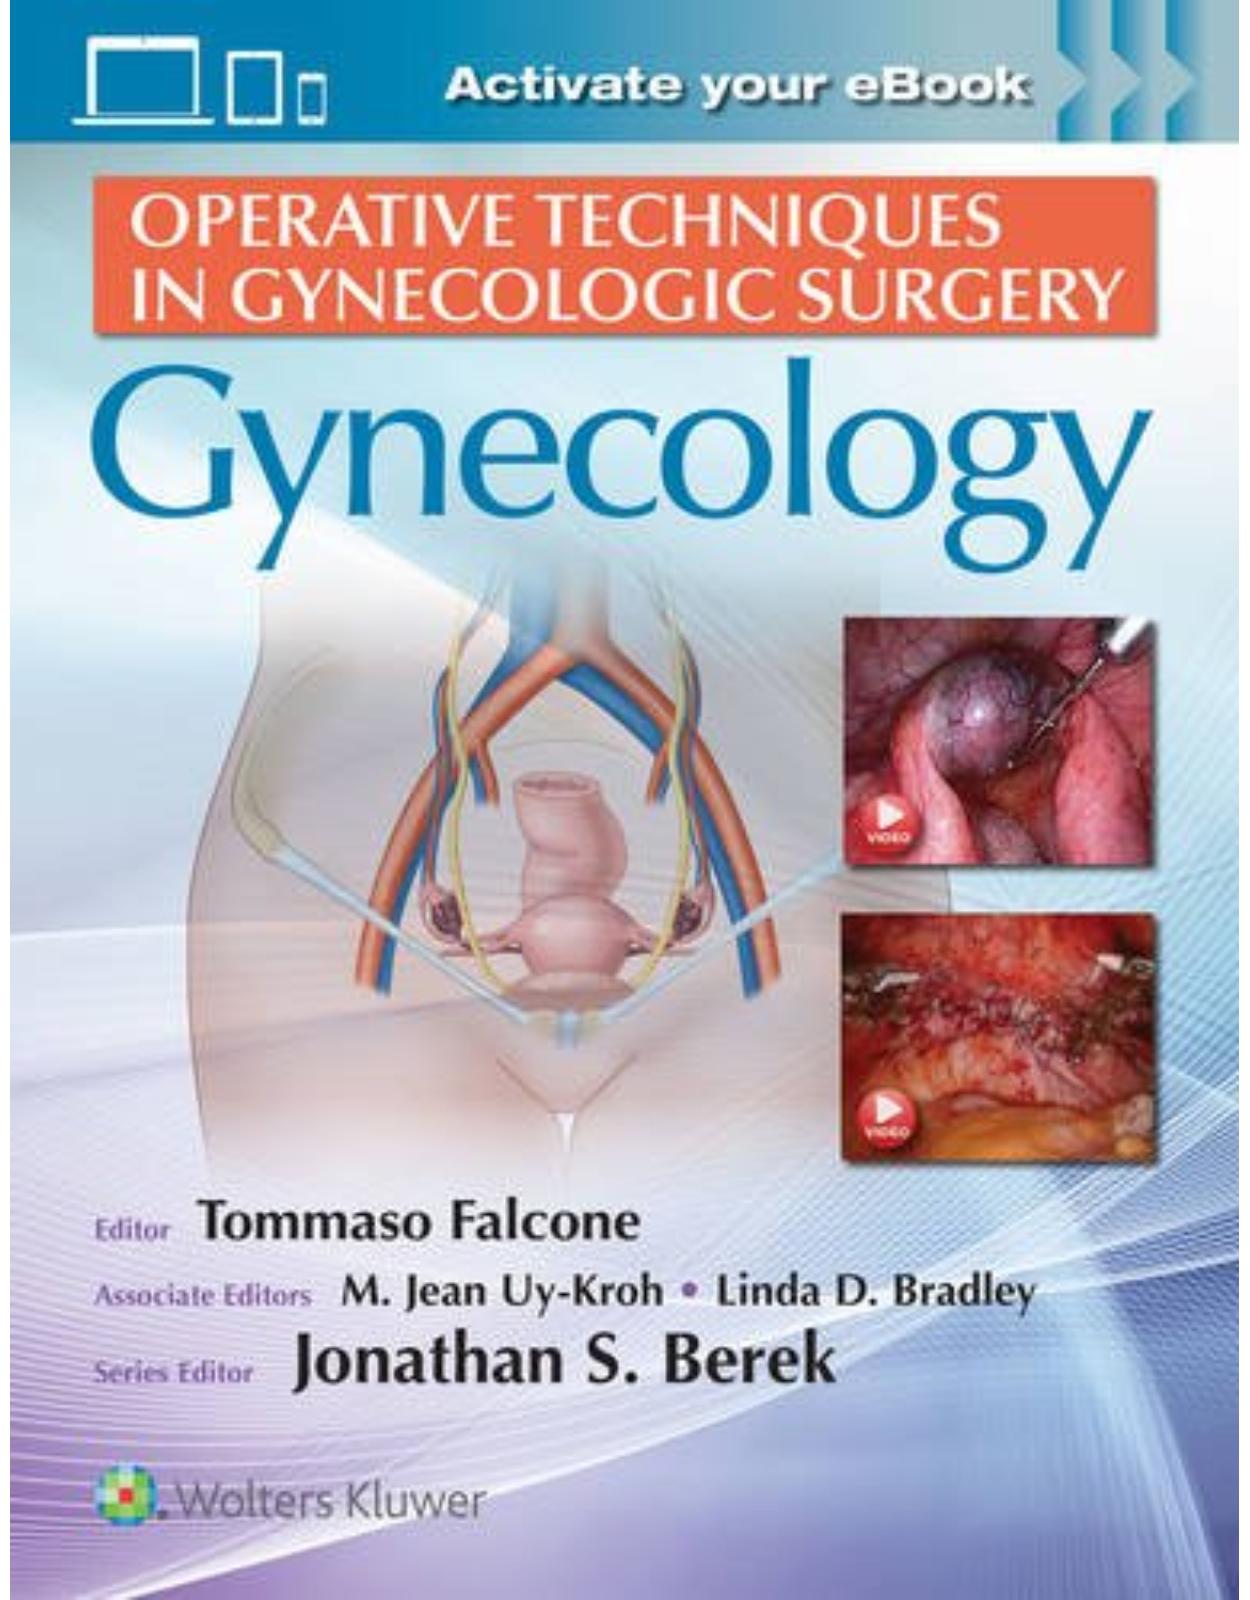 Operative Techniques in Gynecologic Surgery: Gynecology